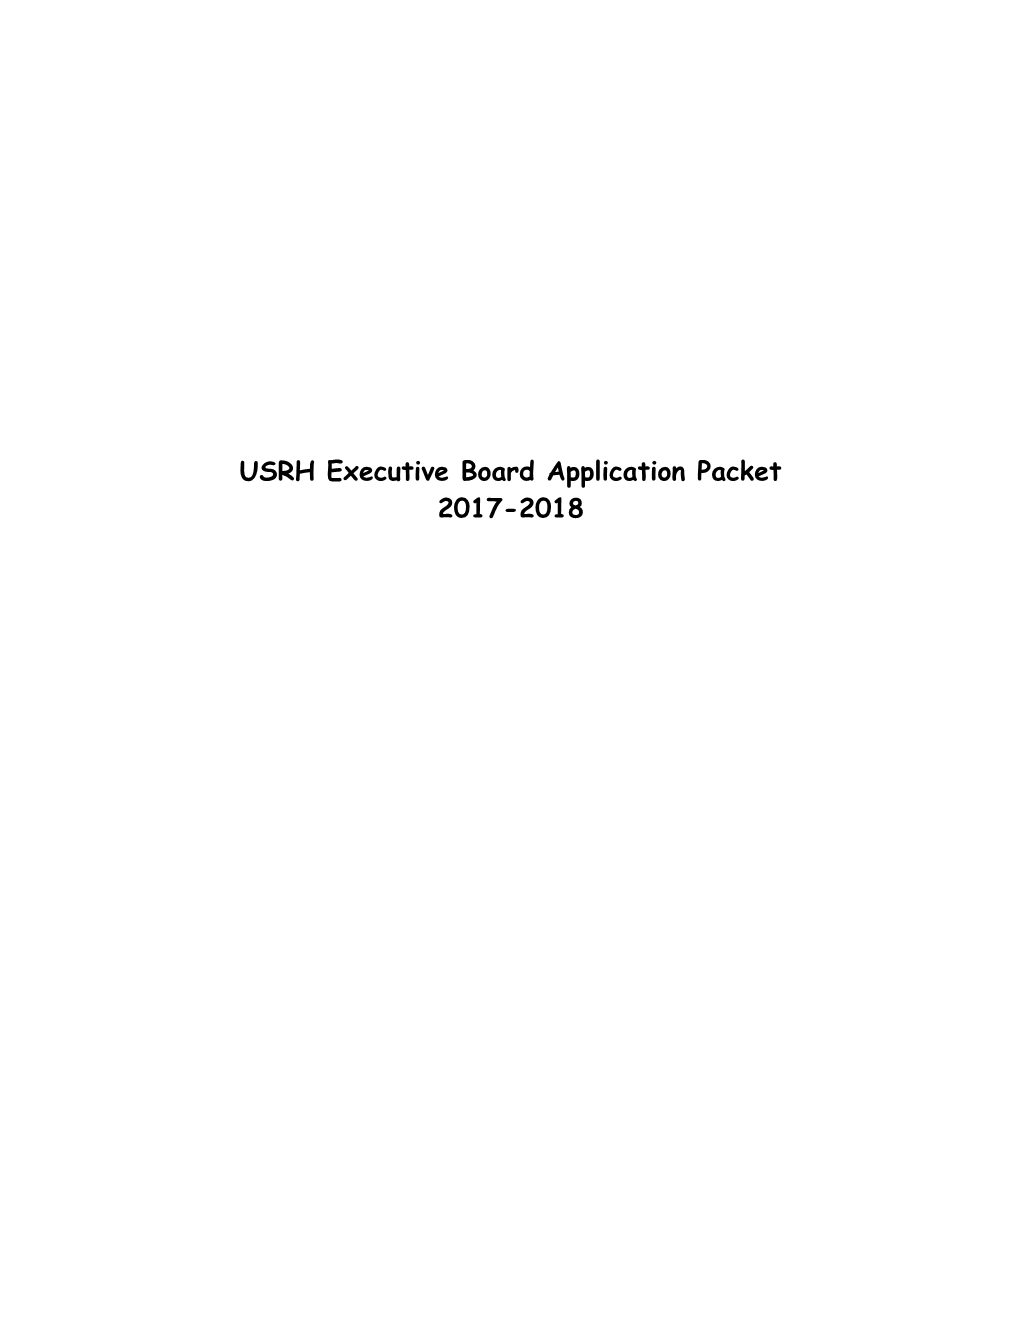 USRH Executive Board Application Packet